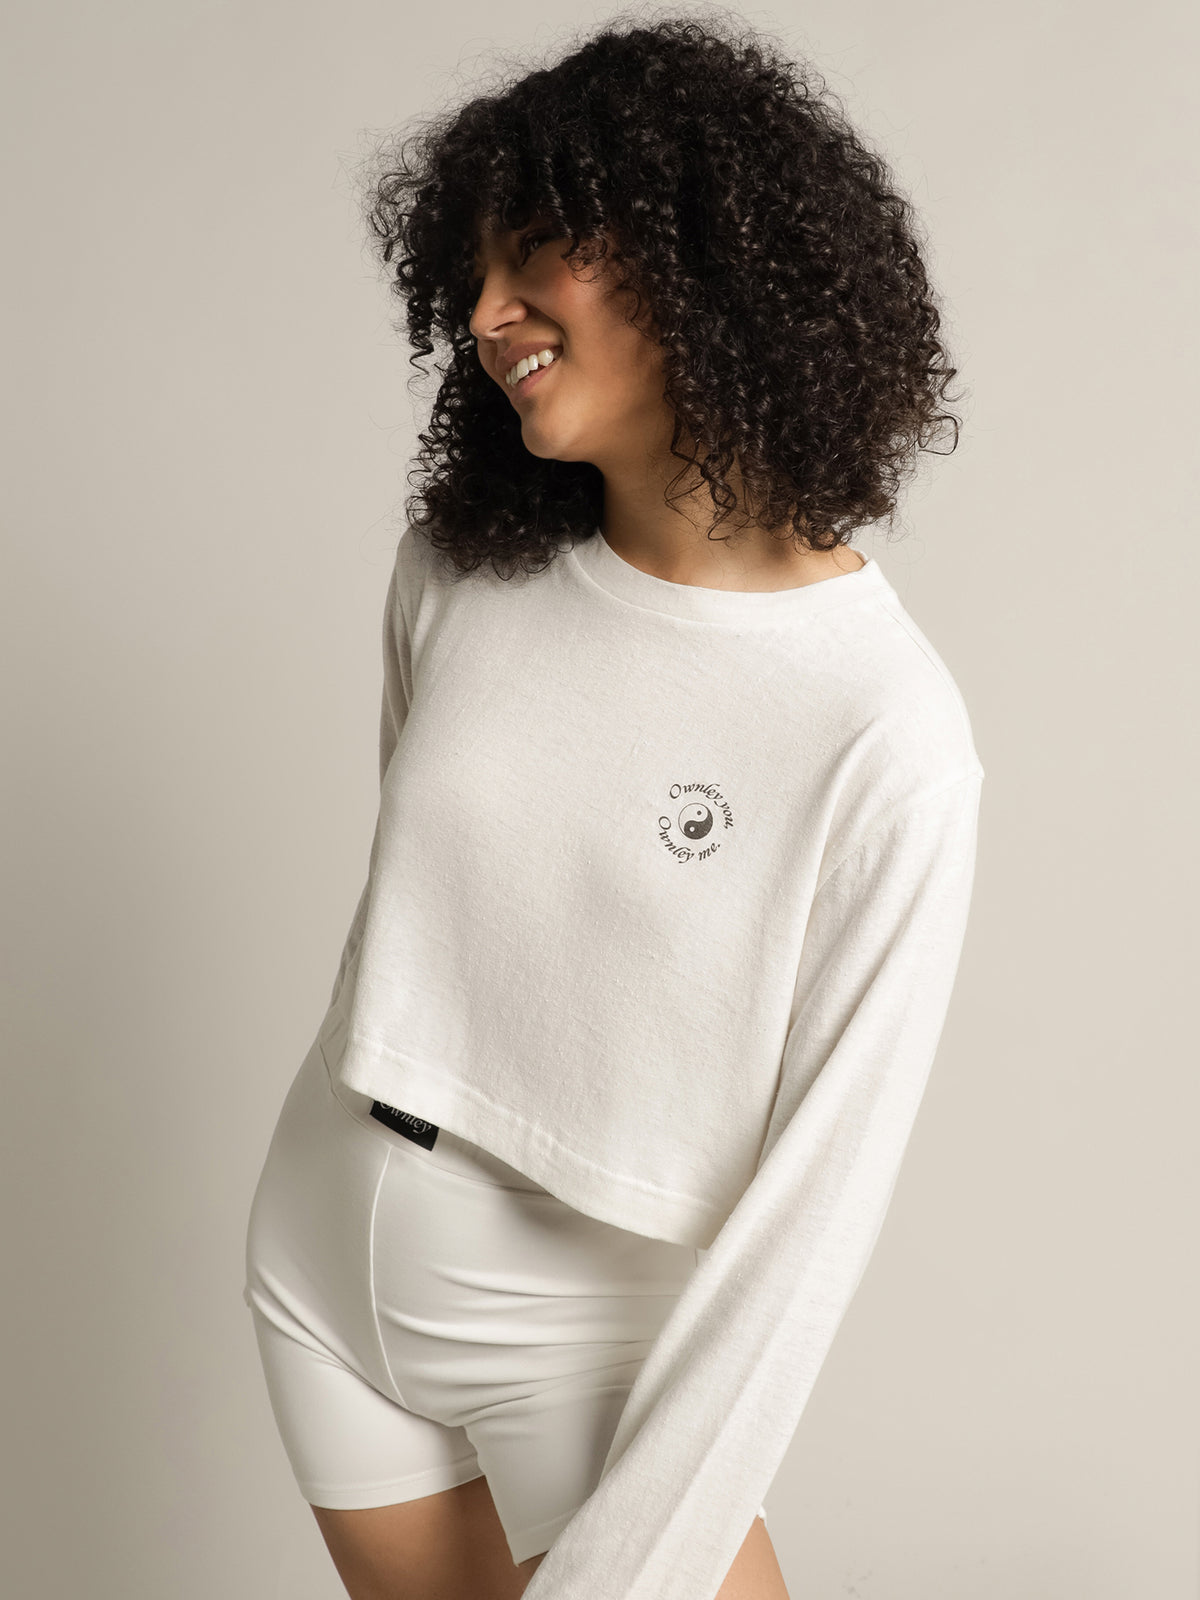 Ownley Long Sleeve T-Shirt in White